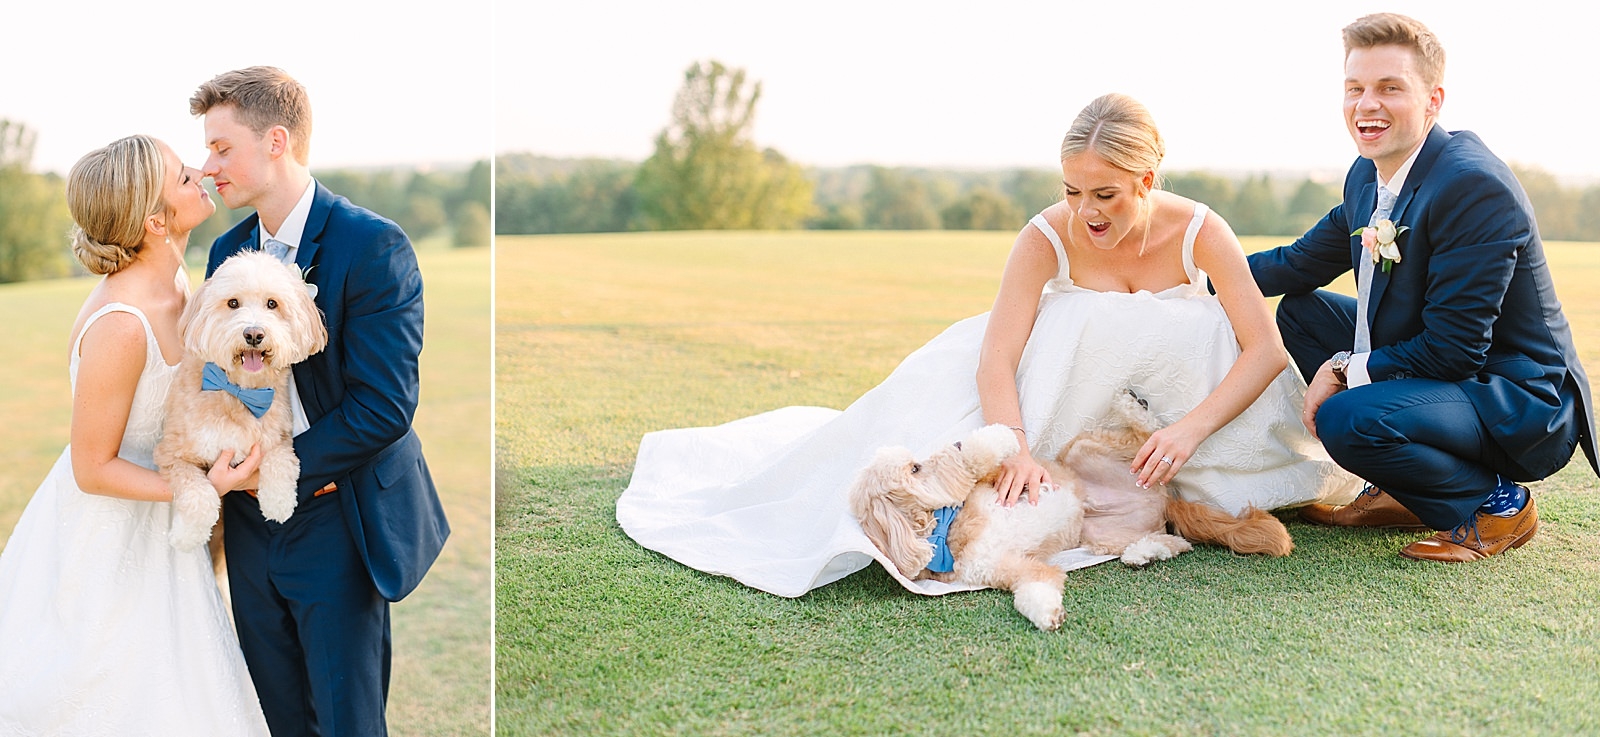 An Evansville Country Club Wedding | Ashley and Beau | Bret and Brandie Photography218.jpg